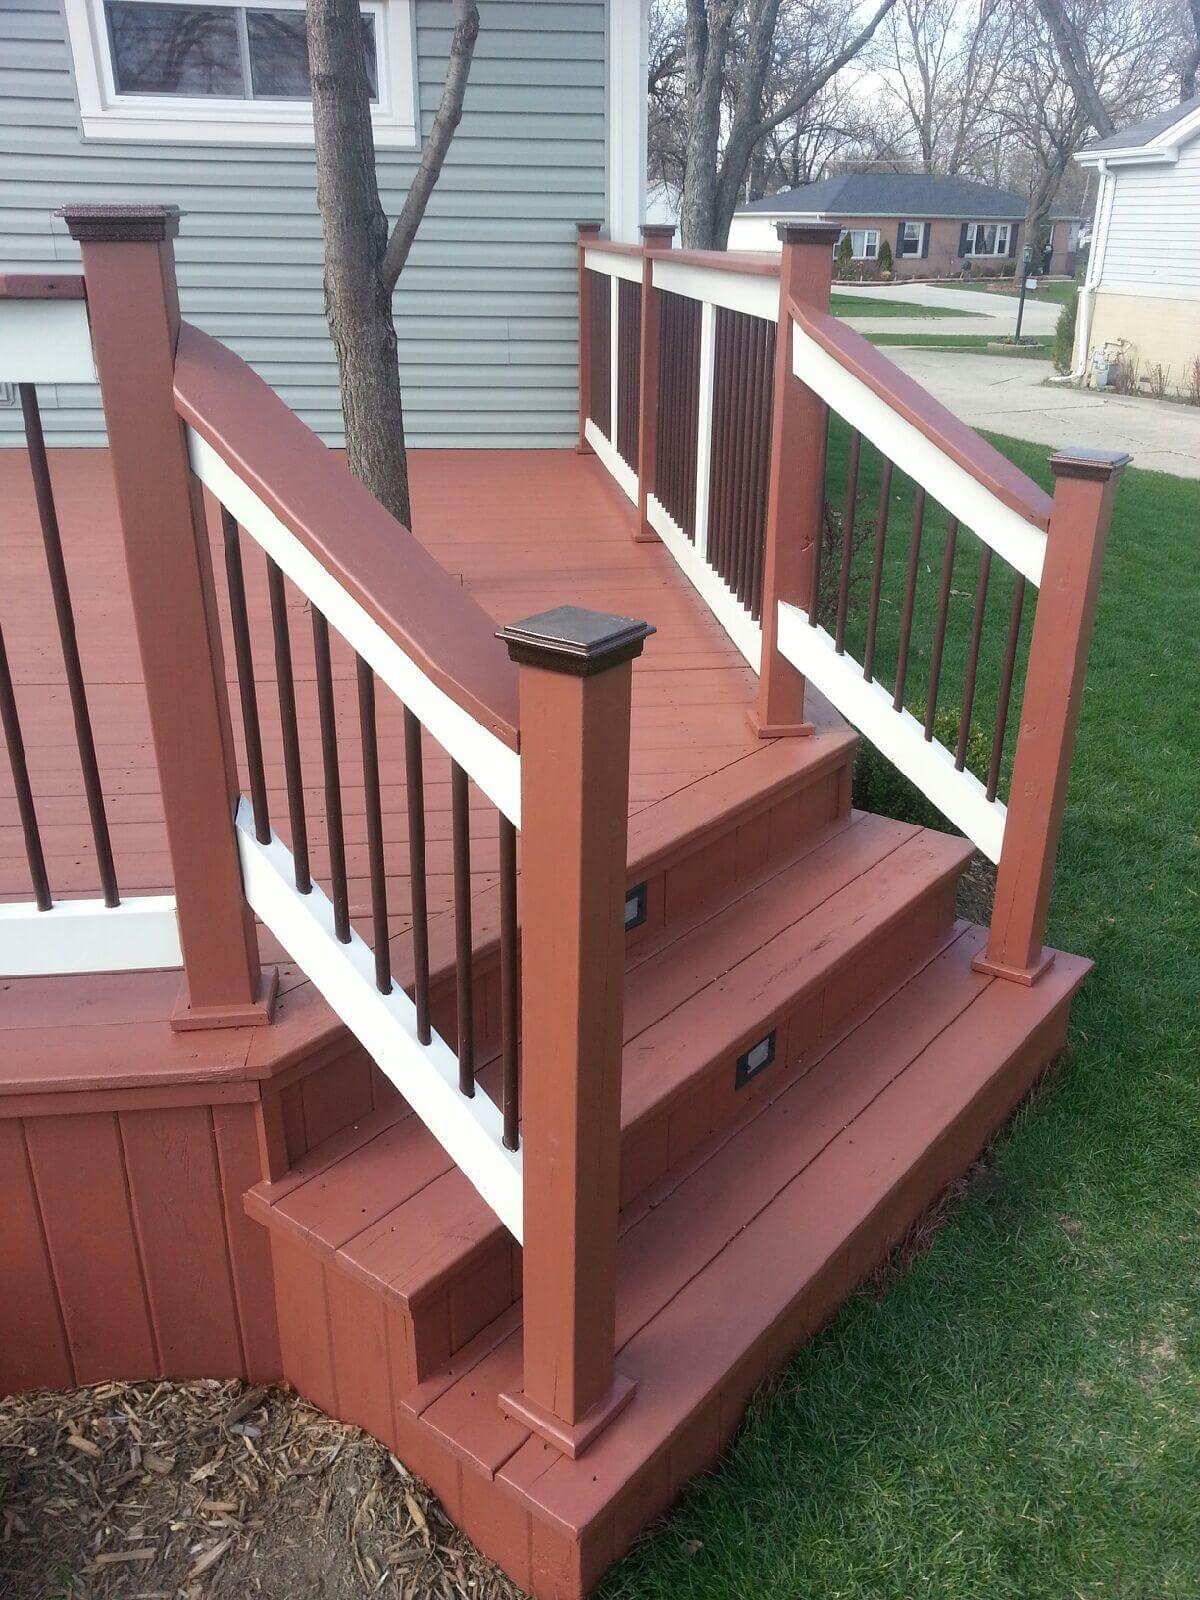 Repairs and maintenance for your deck, fence, and exterior wood staining. - Deck Staining Crystal Lake - Deck Cleaning Services